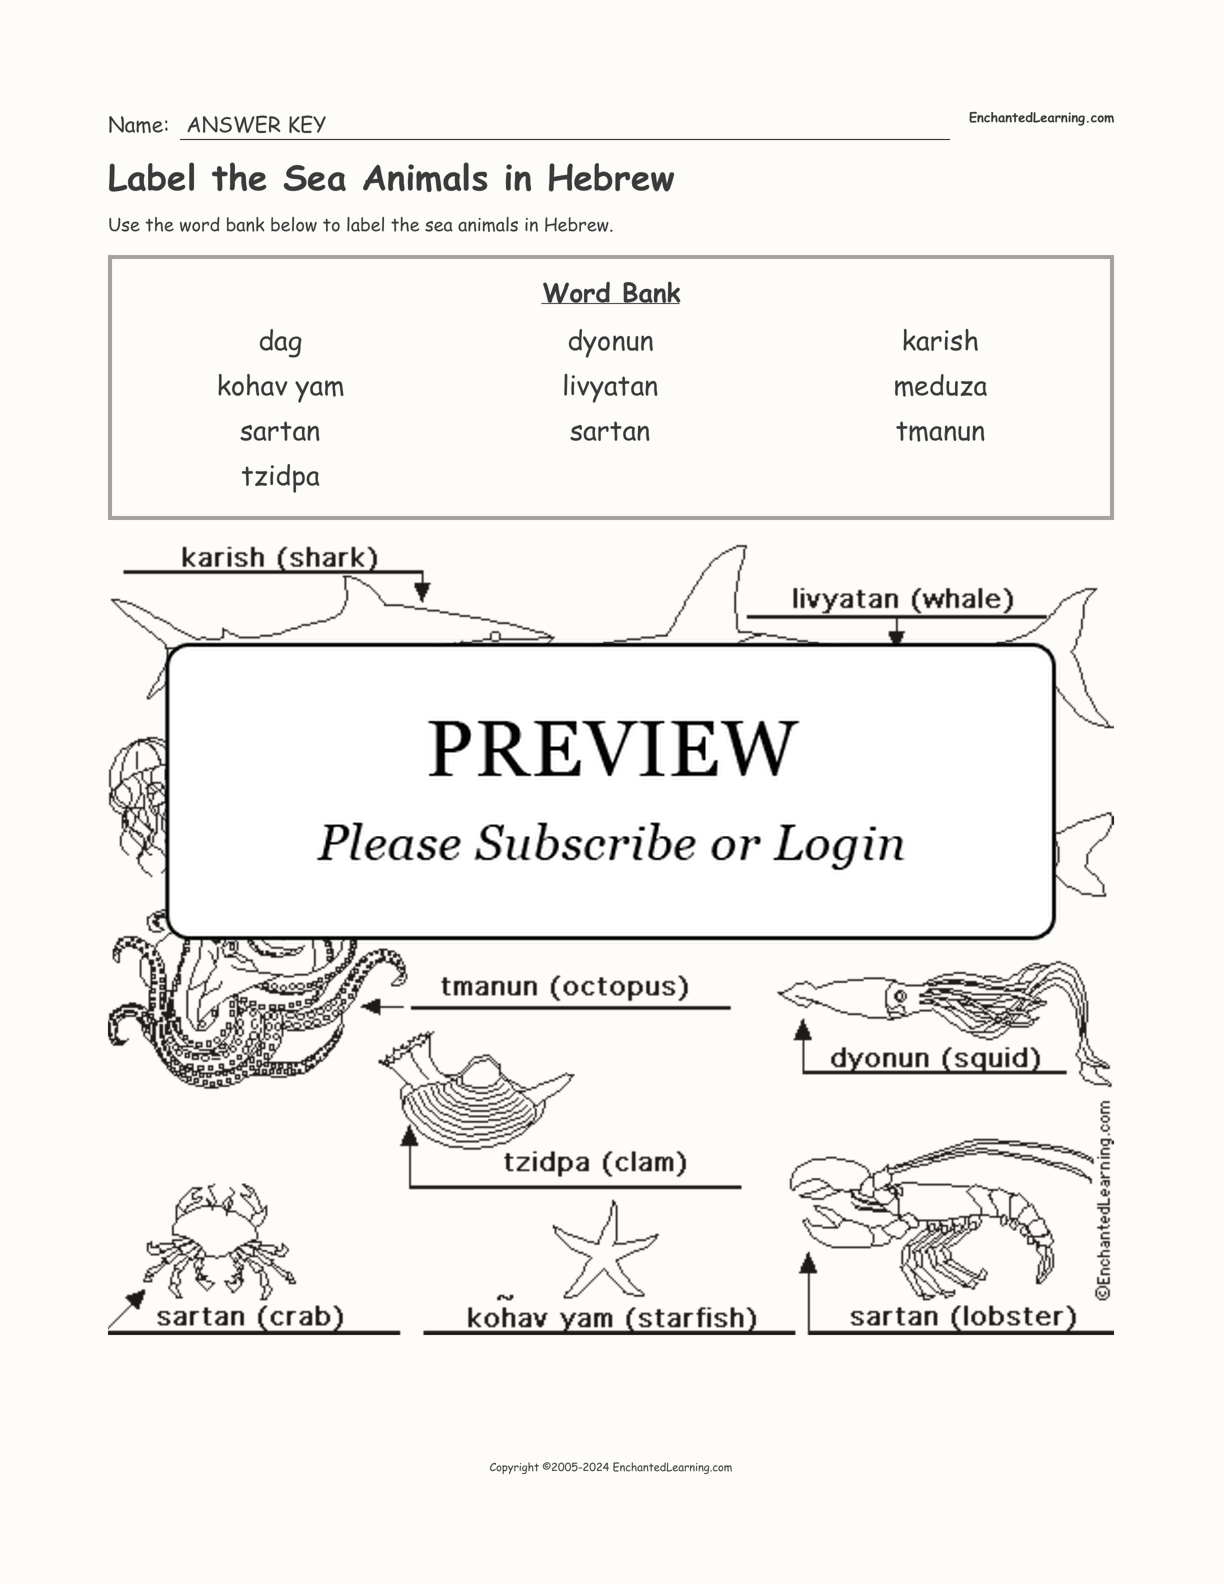 Label the Sea Animals in Hebrew interactive worksheet page 2